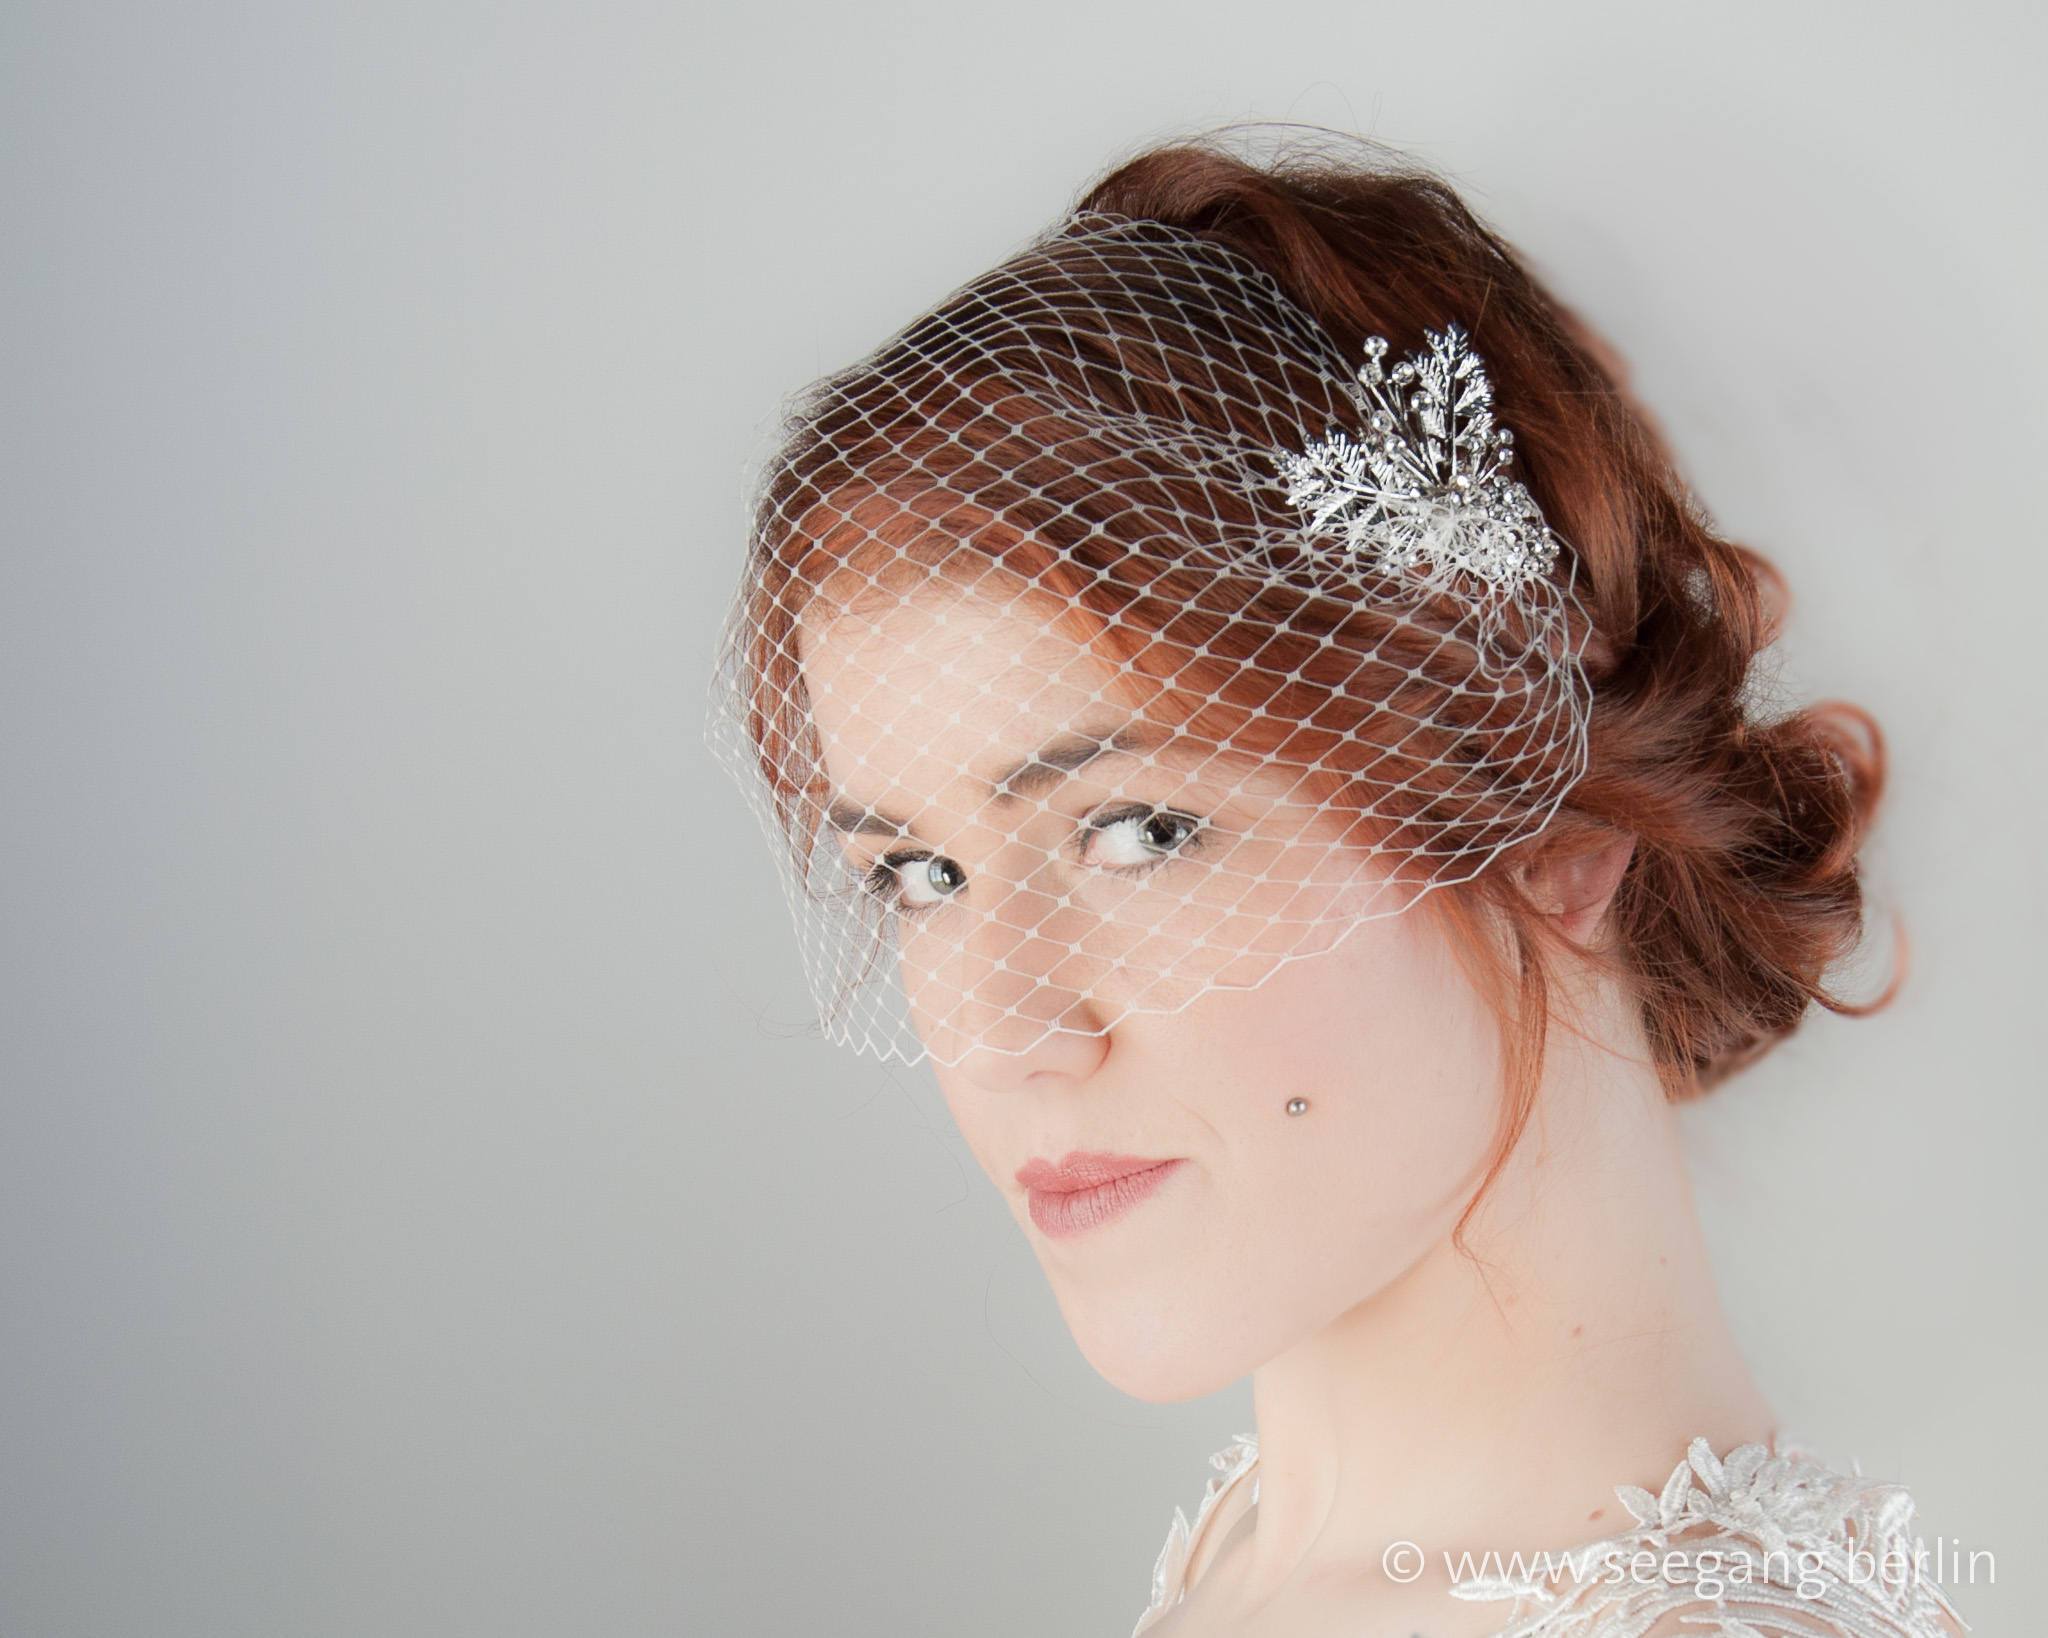 BIRDCAGE - BRIDAL VEIL HEADDRESS HOLD BY HAIR COMBS WITH RHINESTONES IN SILVER COLOUR © Seegang Berlin